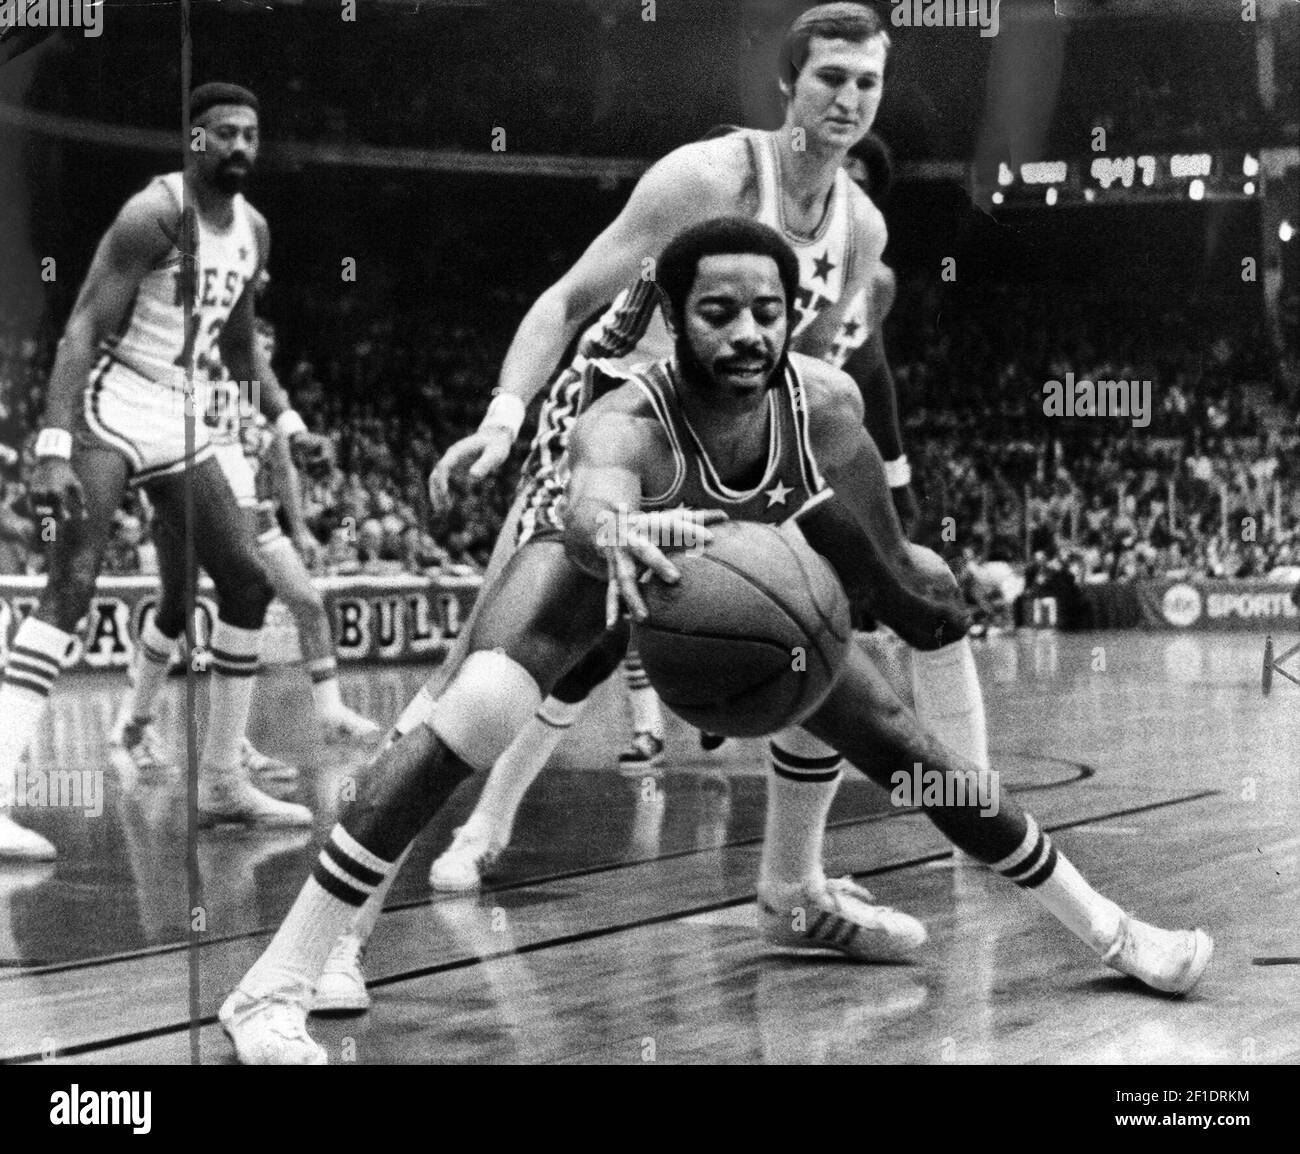 The New York Knicks' Walt Frazier stretches for a loose ball in front of the Los Angeles Lakers' Jerry West during the NBA All-Star Game at Chicago Stadium on January 23, 1973, in Chicago. (Photo by Ed Wagner Jr./Chicago Tribune/TNS/Sipa USA) Stock Photo